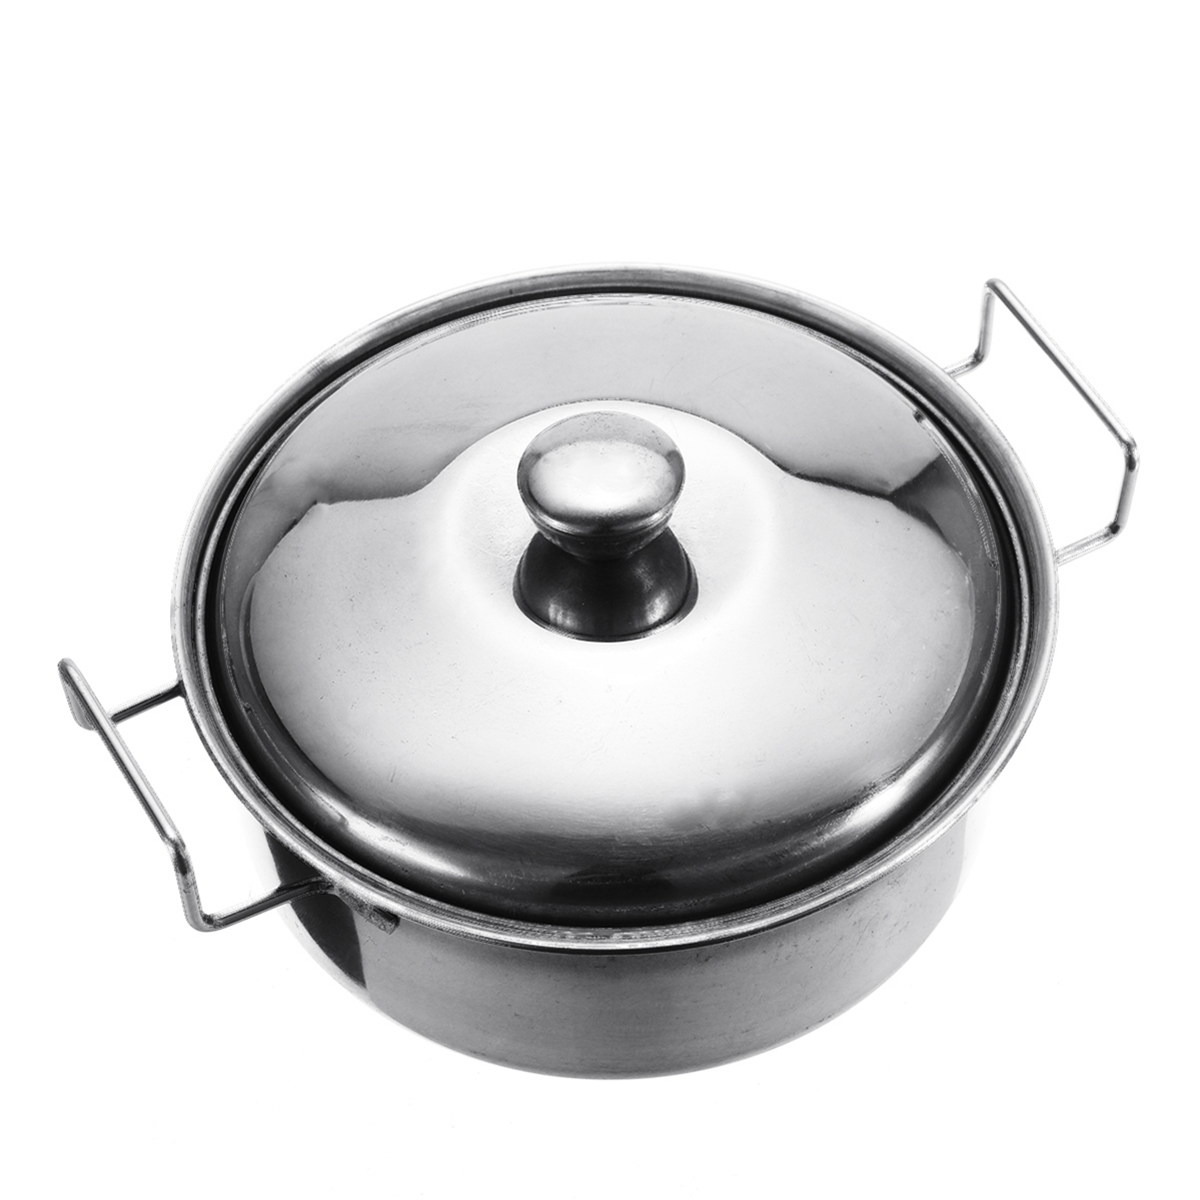 10pc-Stainless-steel-Cookware-Kitchen-Cooking-Set-Pot-Pans-House-Play-Toy-For-Children-1418086